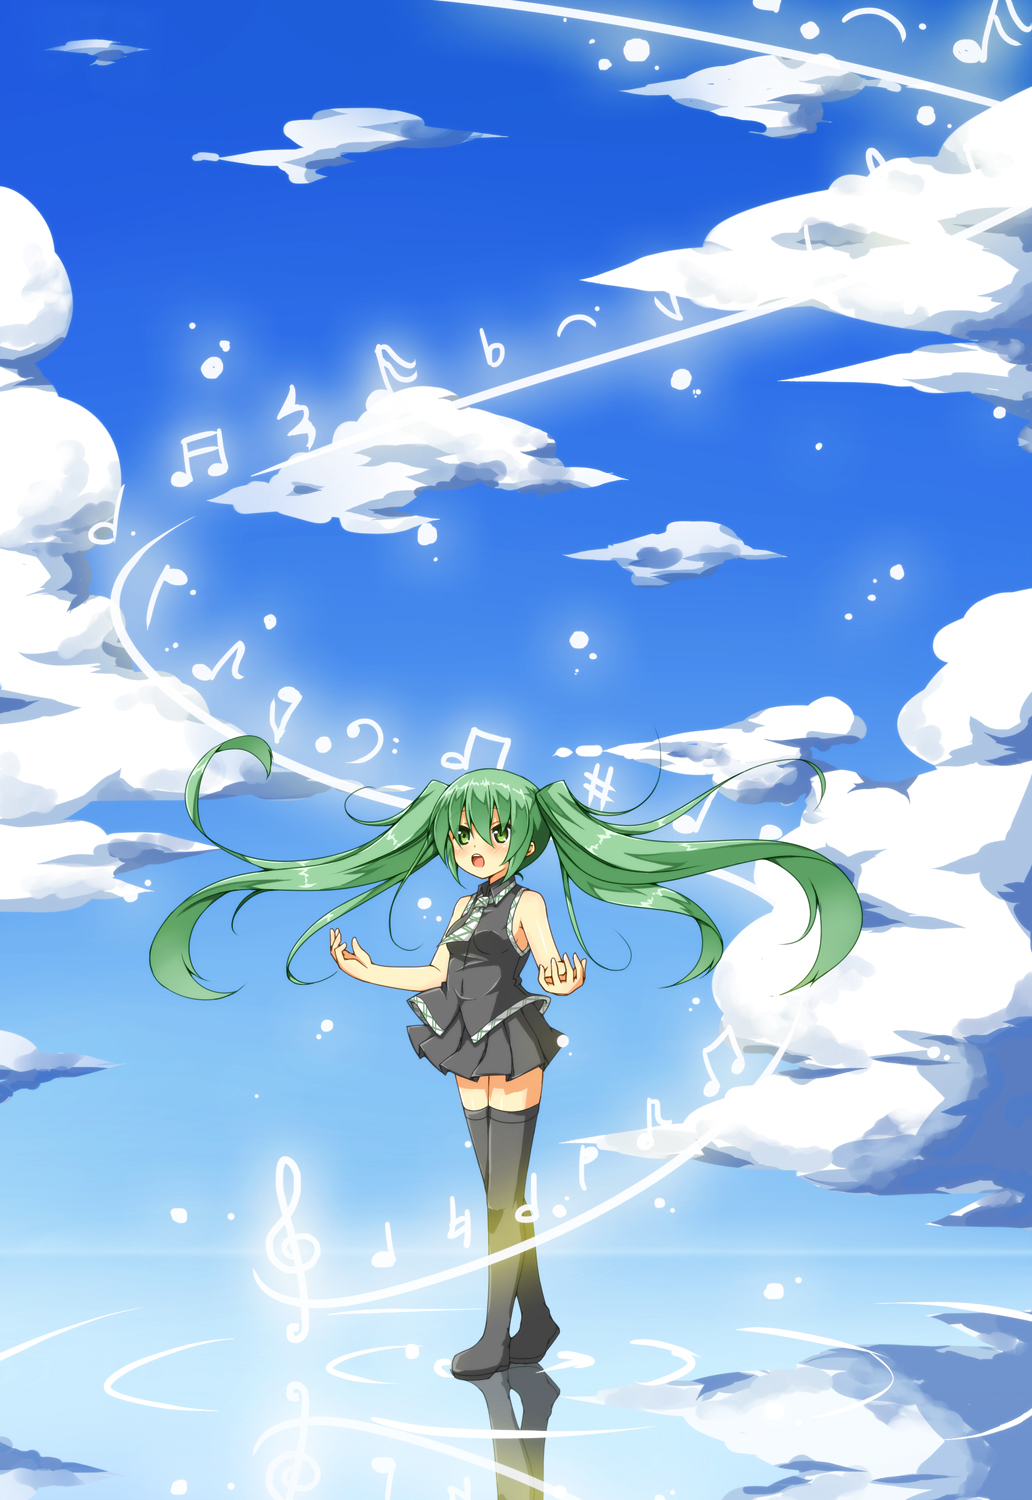 1girl bass_clef beamed_eighth_notes beamed_sixteenth_notes black_footwear black_skirt black_vest blush boots clouds eighth_note flat_sign green_eyes green_hair half_note hatsunatsu hatsune_miku highres long_hair music musical_note natural_sign necktie open_mouth pleated_skirt quarter_note quarter_rest reflection ripples sharp_sign singing sixteenth_note skirt sky solo thigh-highs thigh_boots treble_clef twintails very_long_hair vest vocaloid water